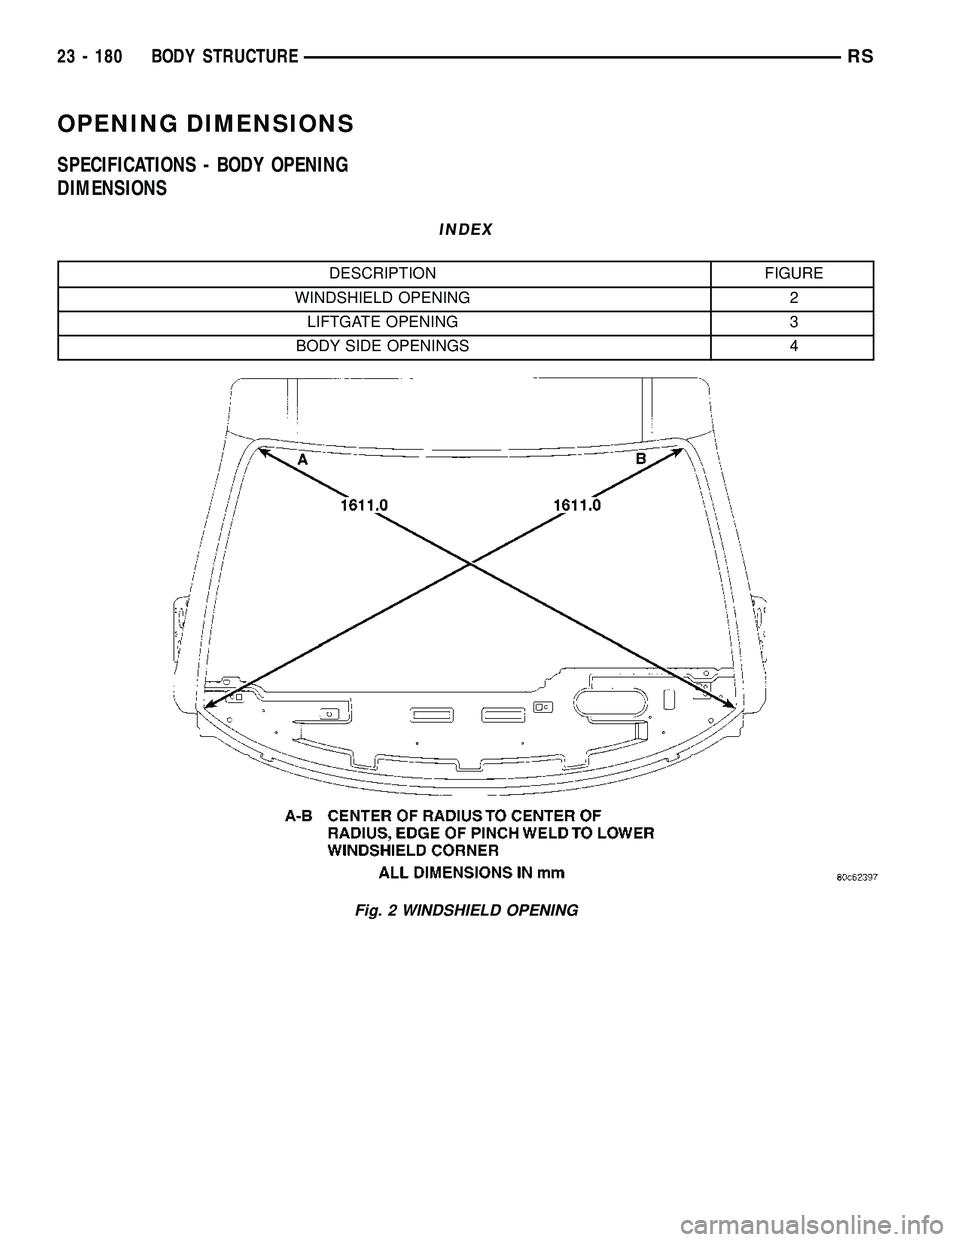 CHRYSLER VOYAGER 2005  Service Manual OPENING DIMENSIONS
SPECIFICATIONS - BODY OPENING
DIMENSIONS
INDEX
DESCRIPTION FIGURE
WINDSHIELD OPENING 2
LIFTGATE OPENING 3
BODY SIDE OPENINGS 4
Fig. 2 WINDSHIELD OPENING
23 - 180 BODY STRUCTURERS 